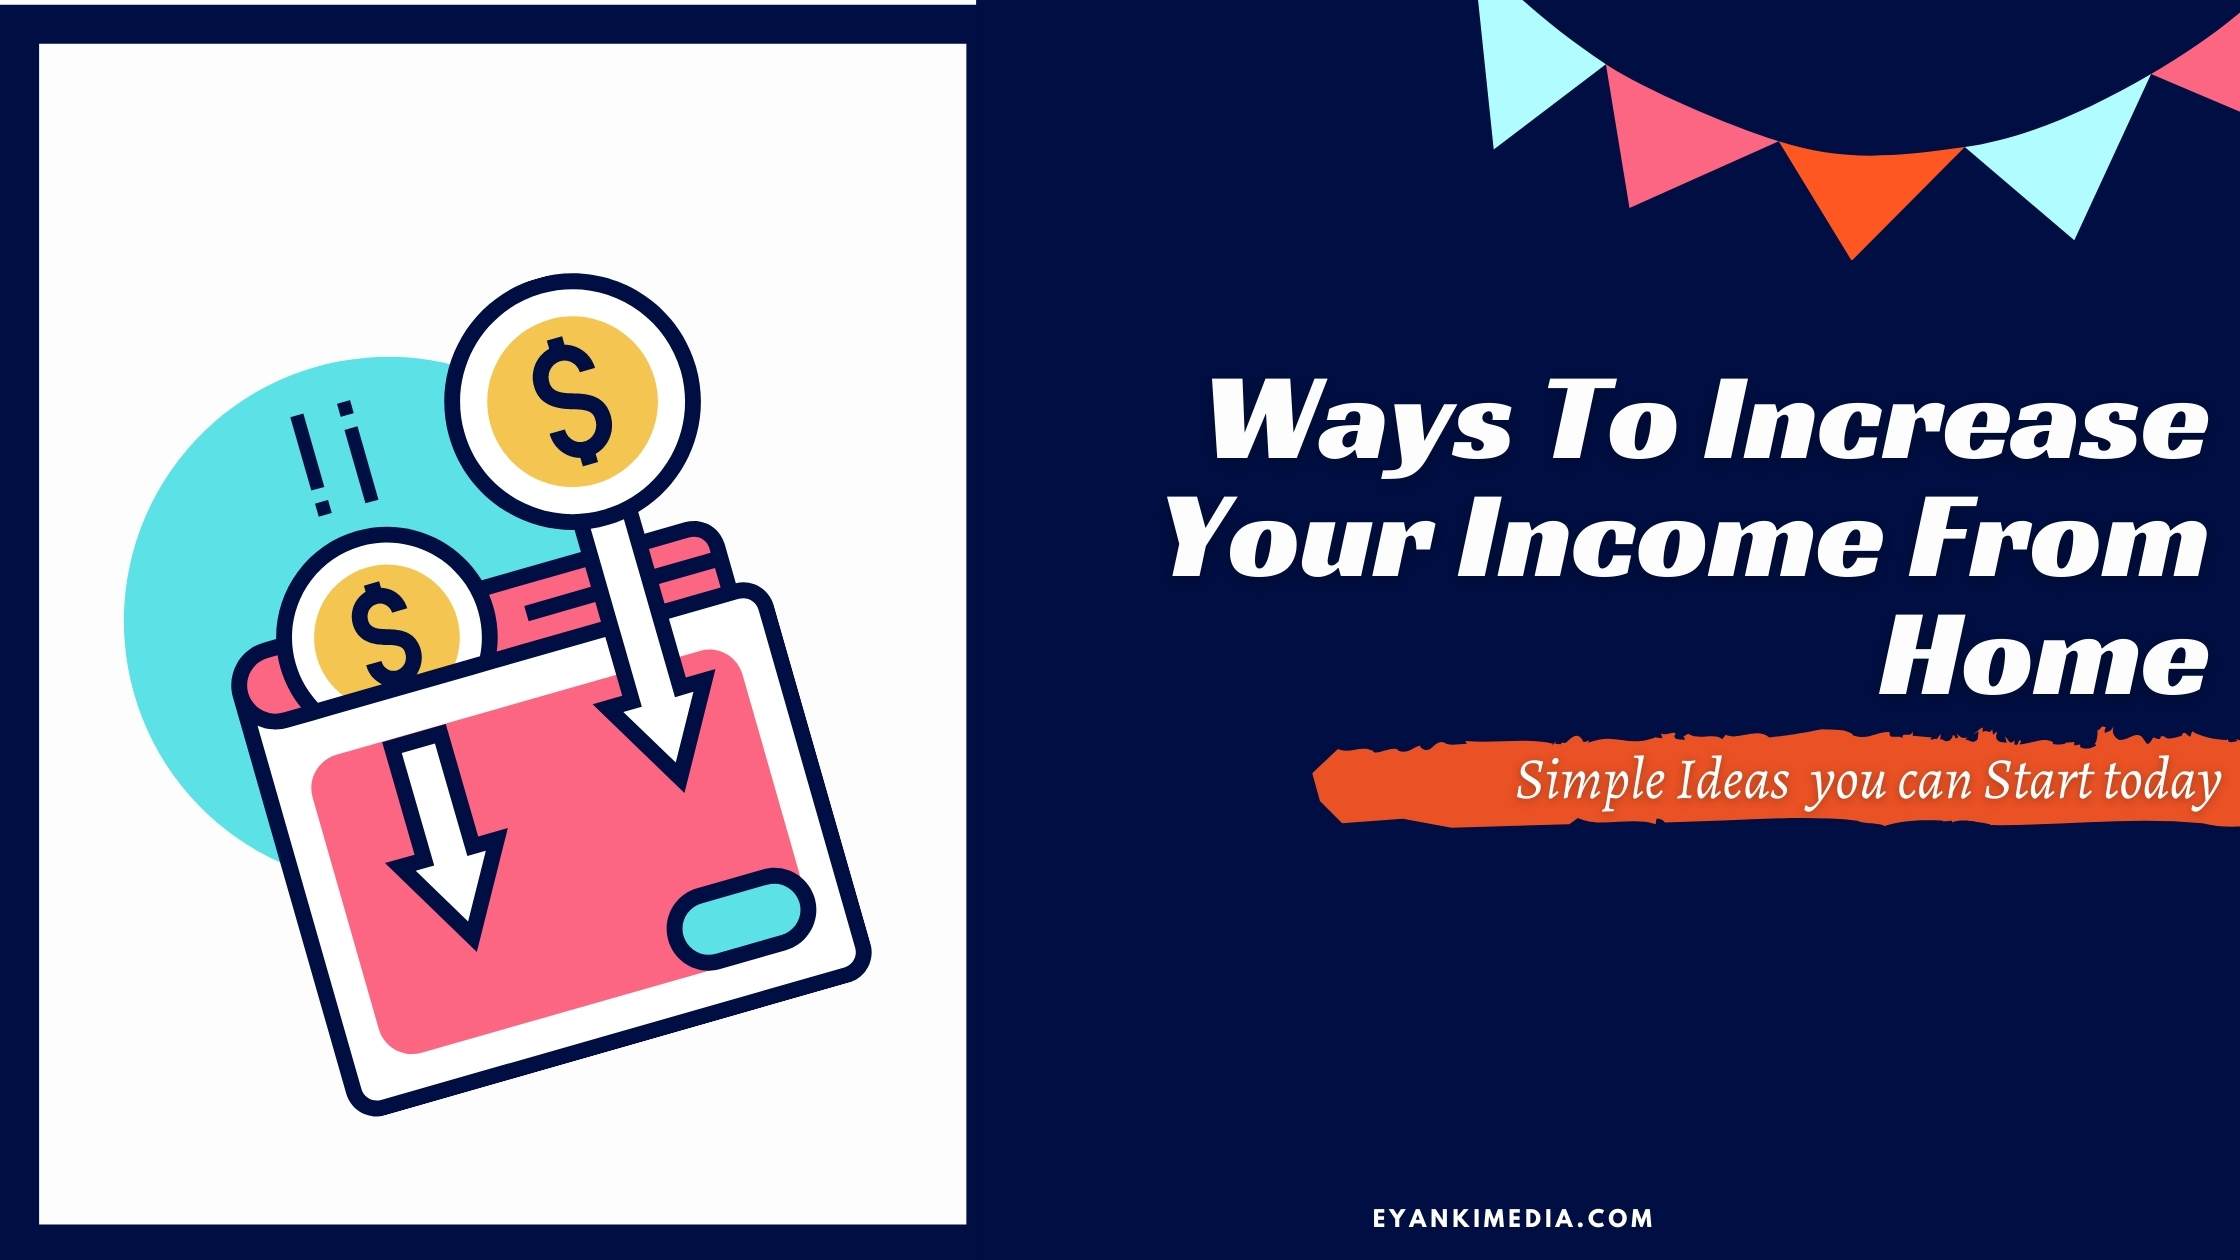 Ways To Increase Your Income From Home